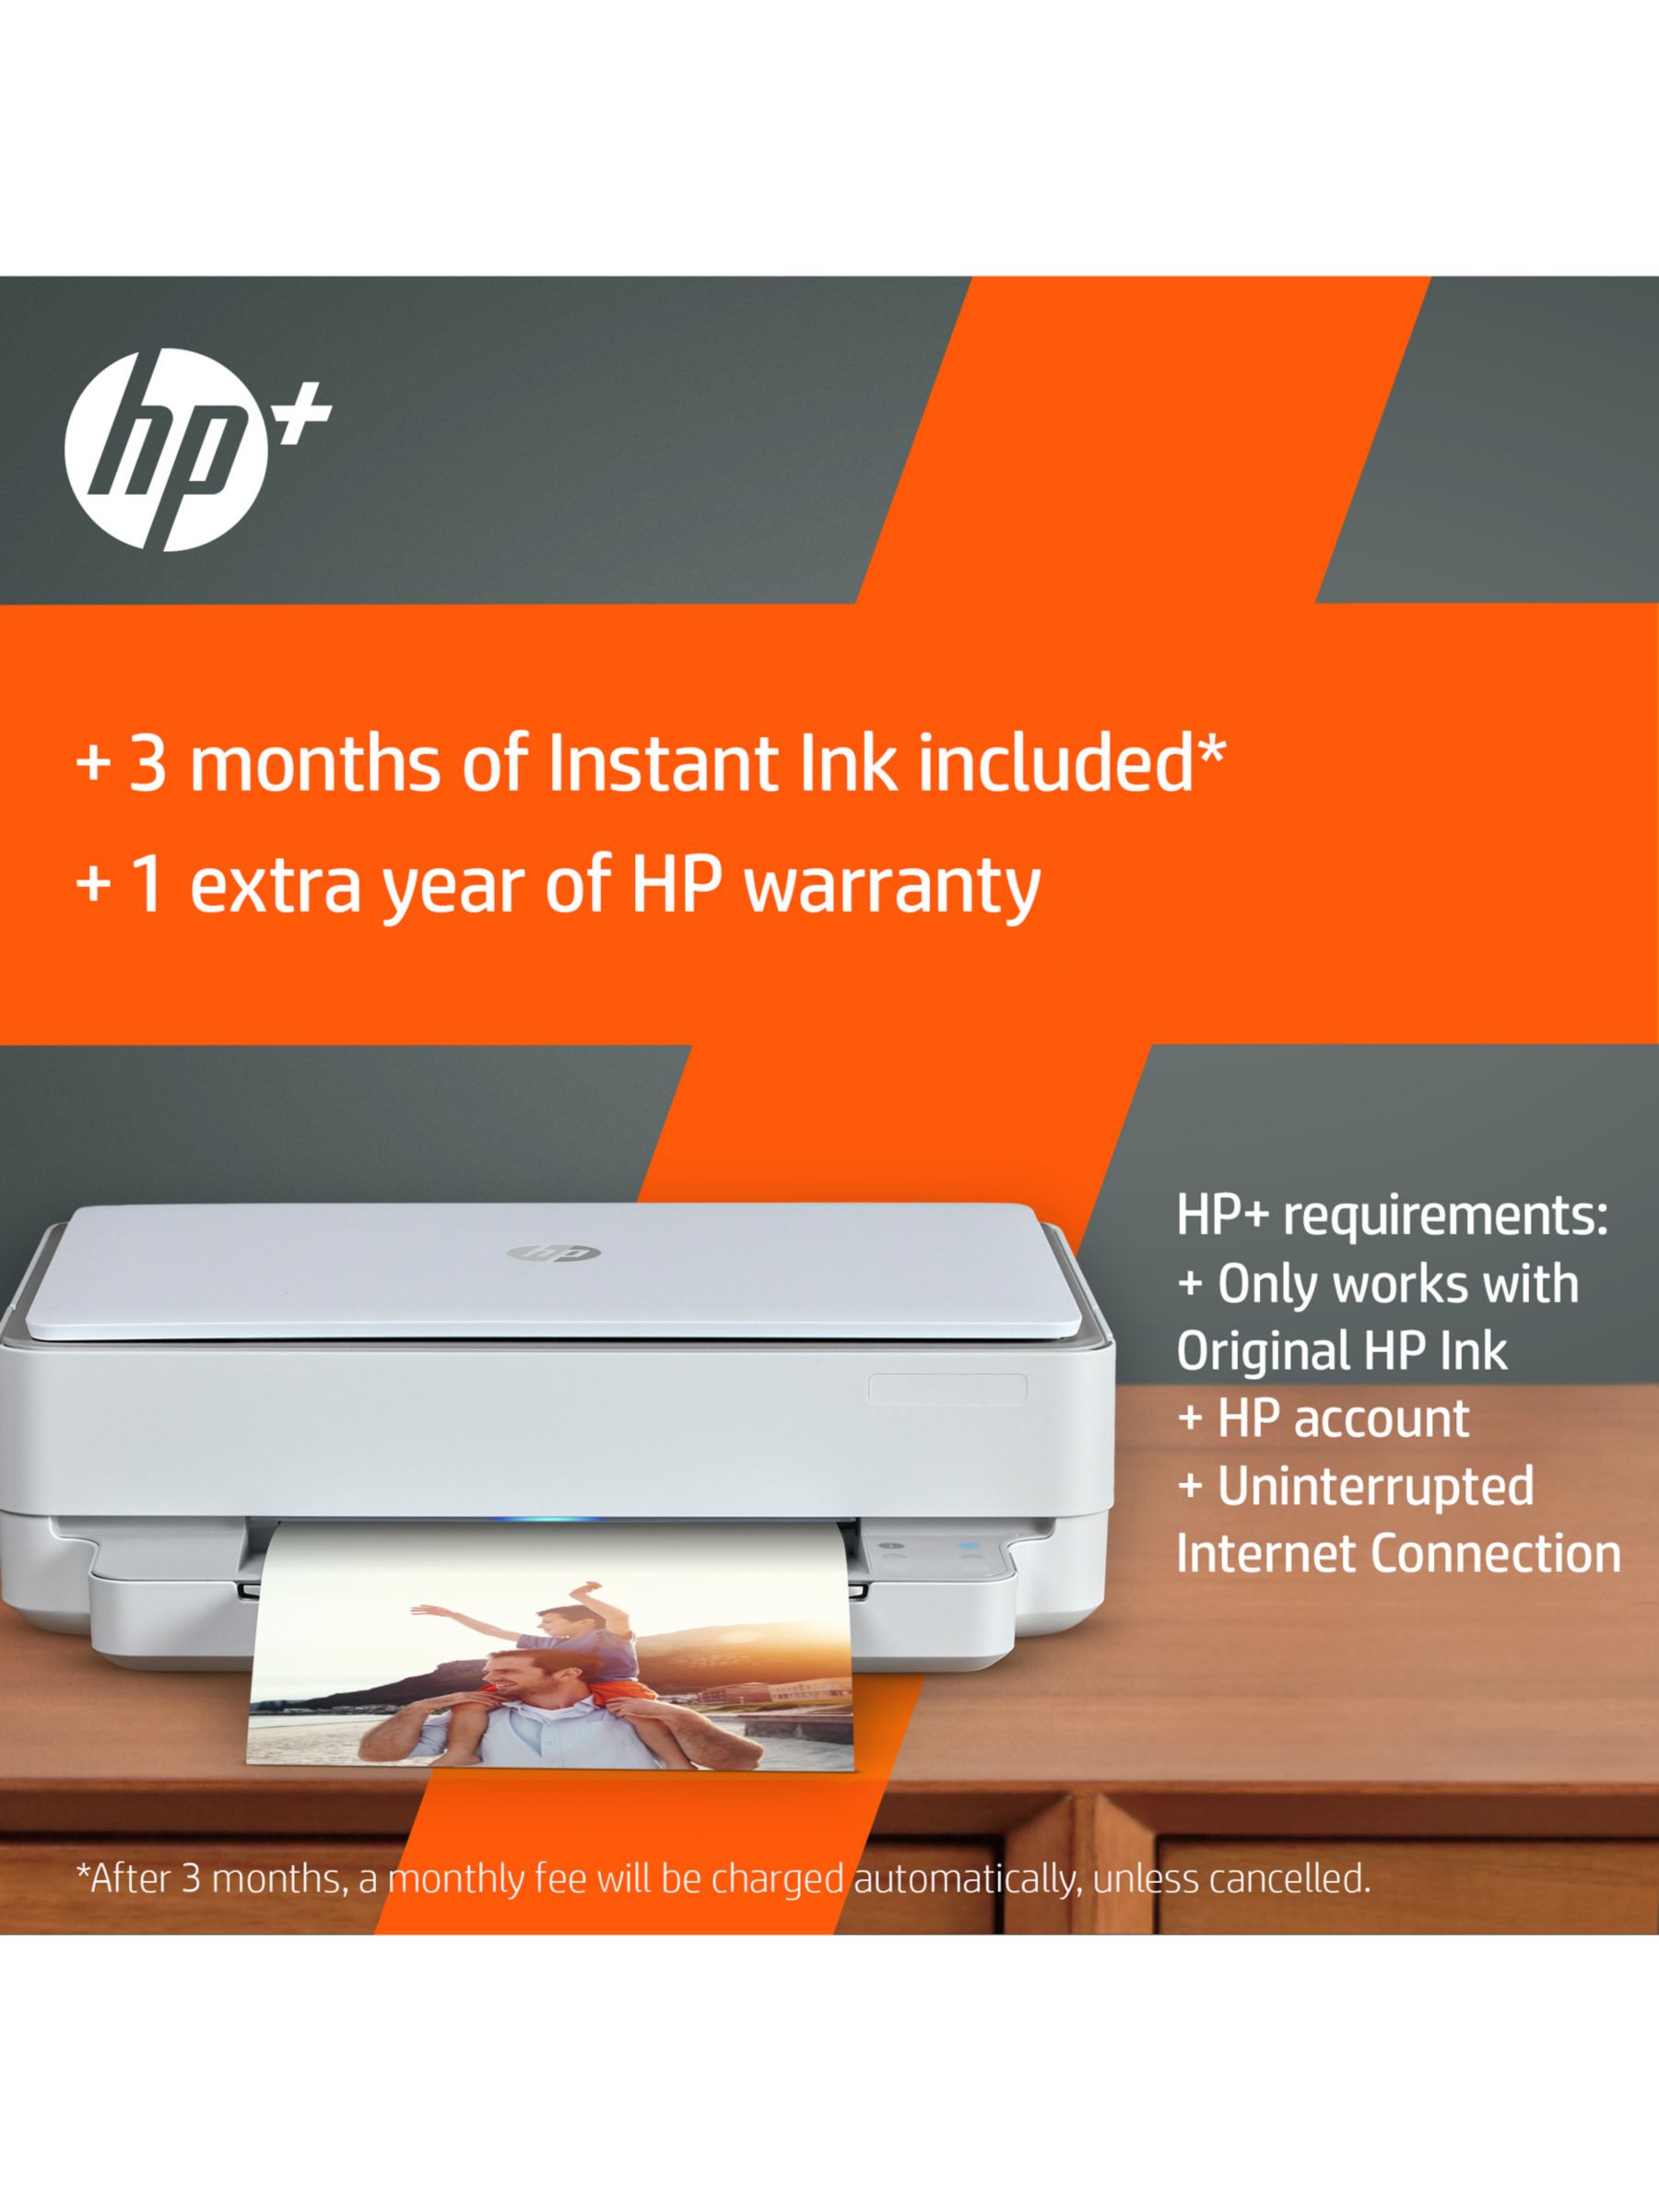 HP ENVY 6020e All-In-One & Cement HP Ink Enabled Compatible, Wireless Printer, HP+ Instant